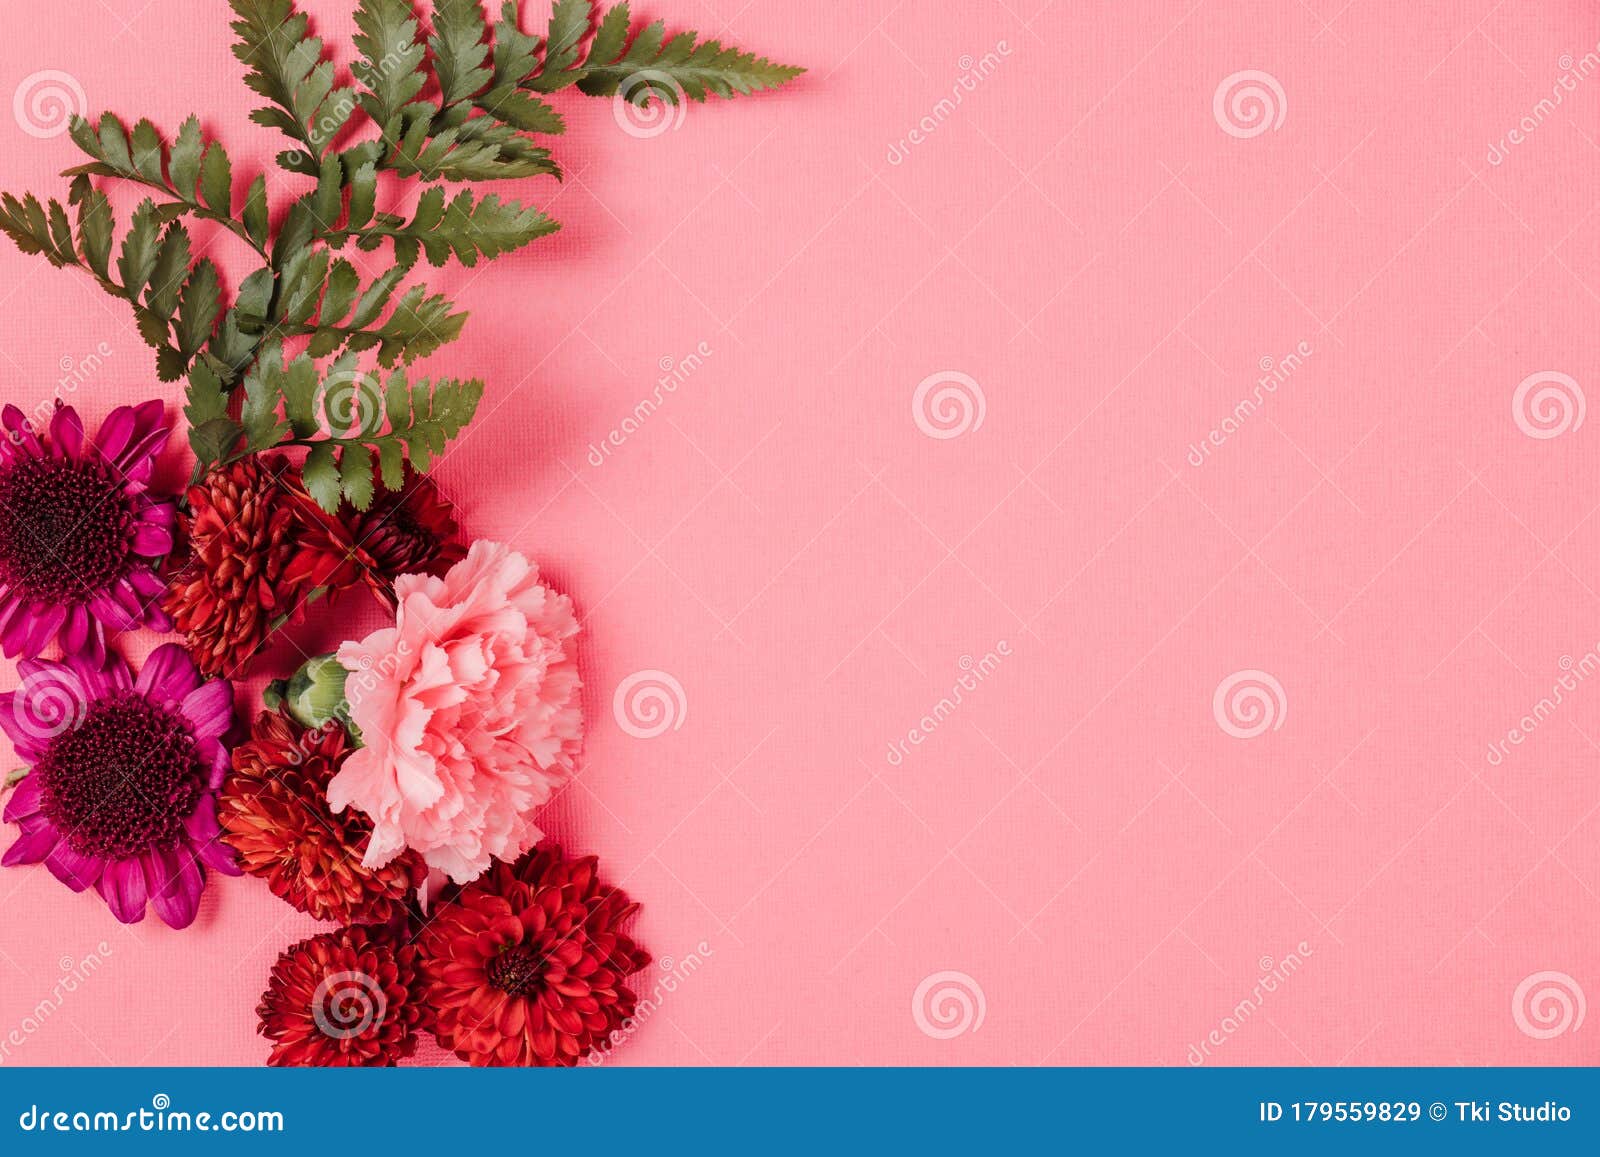 Pink Background with Red, Pink and Purple Flowers Stock Image - Image ...